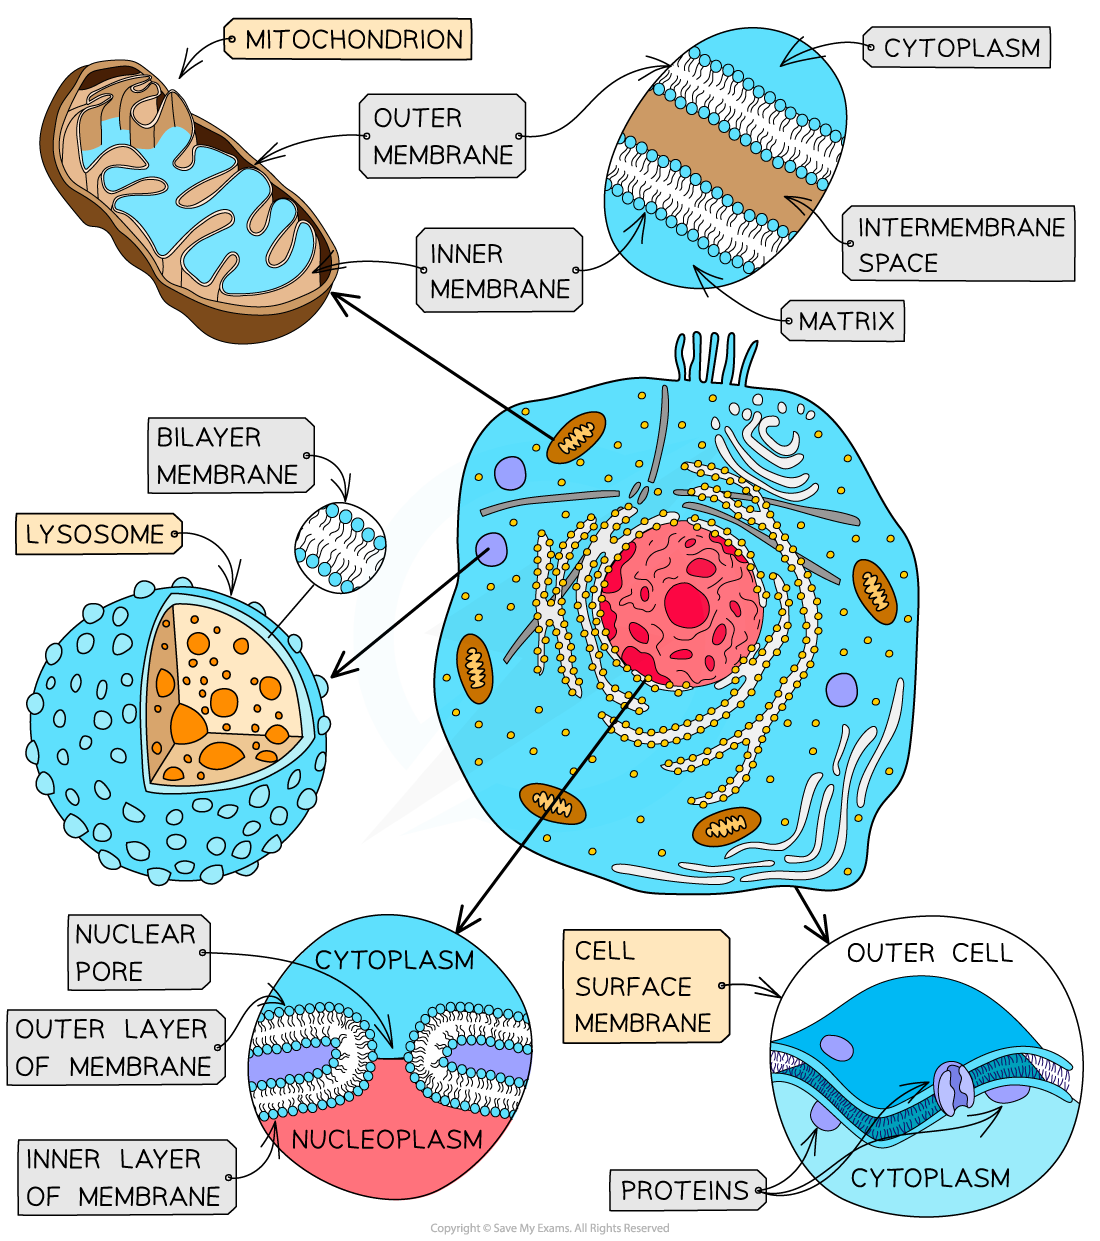 Aqa A Level Biology复习笔记241 The Structure Of Cell Membranes 翰林国际教育